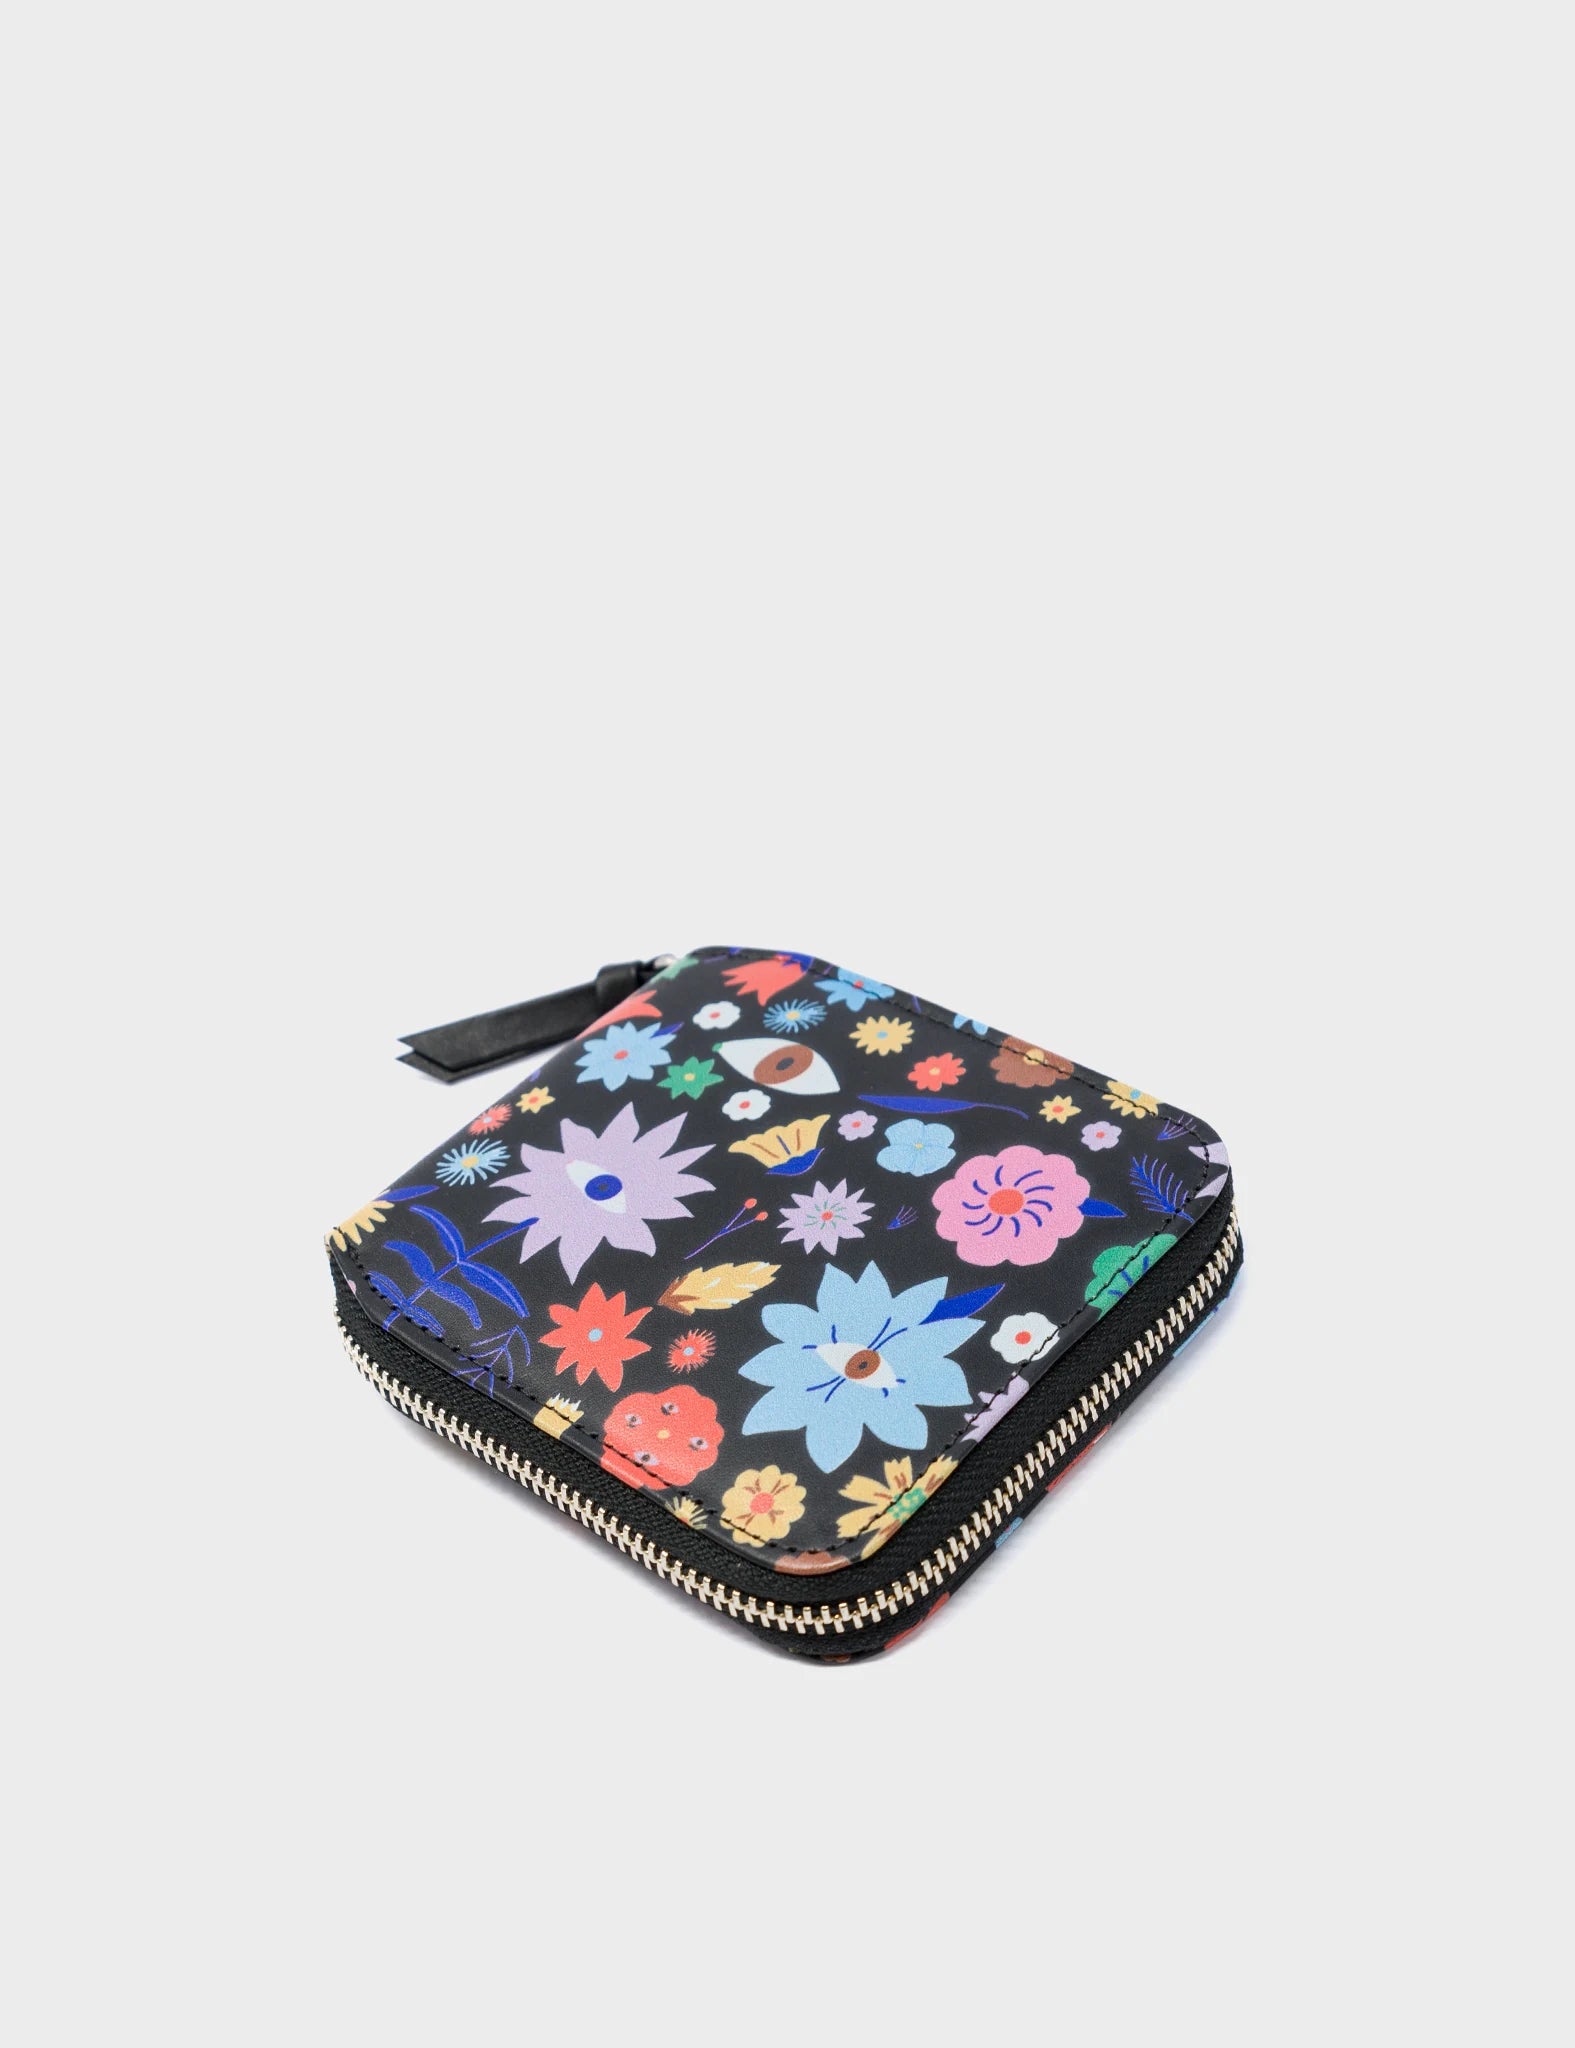 Fedor Black And Blue Leather Wallet - Flowers Print - Side 